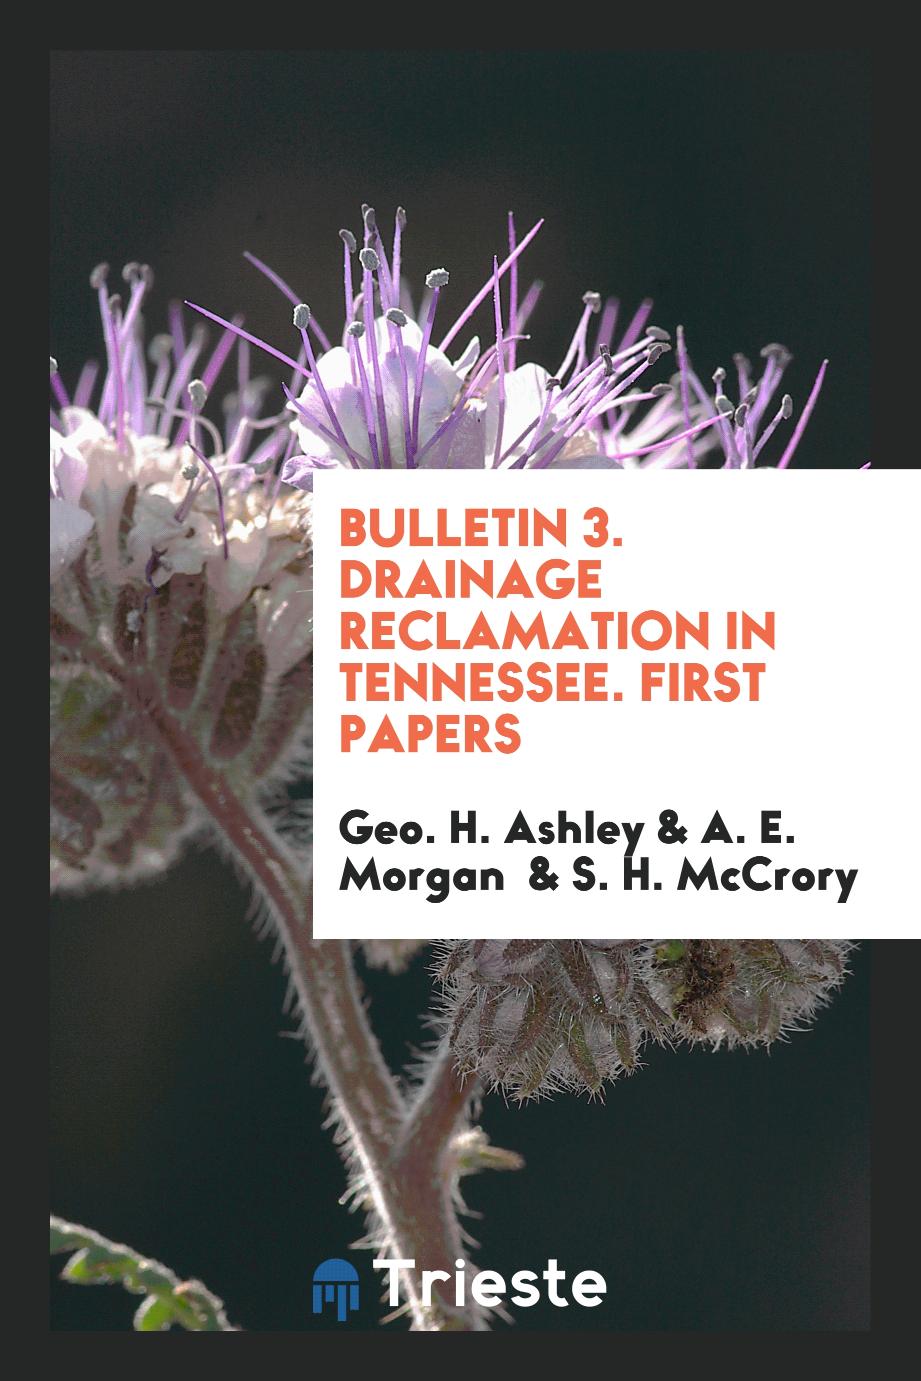 Bulletin 3. Drainage reclamation in Tennessee. First papers